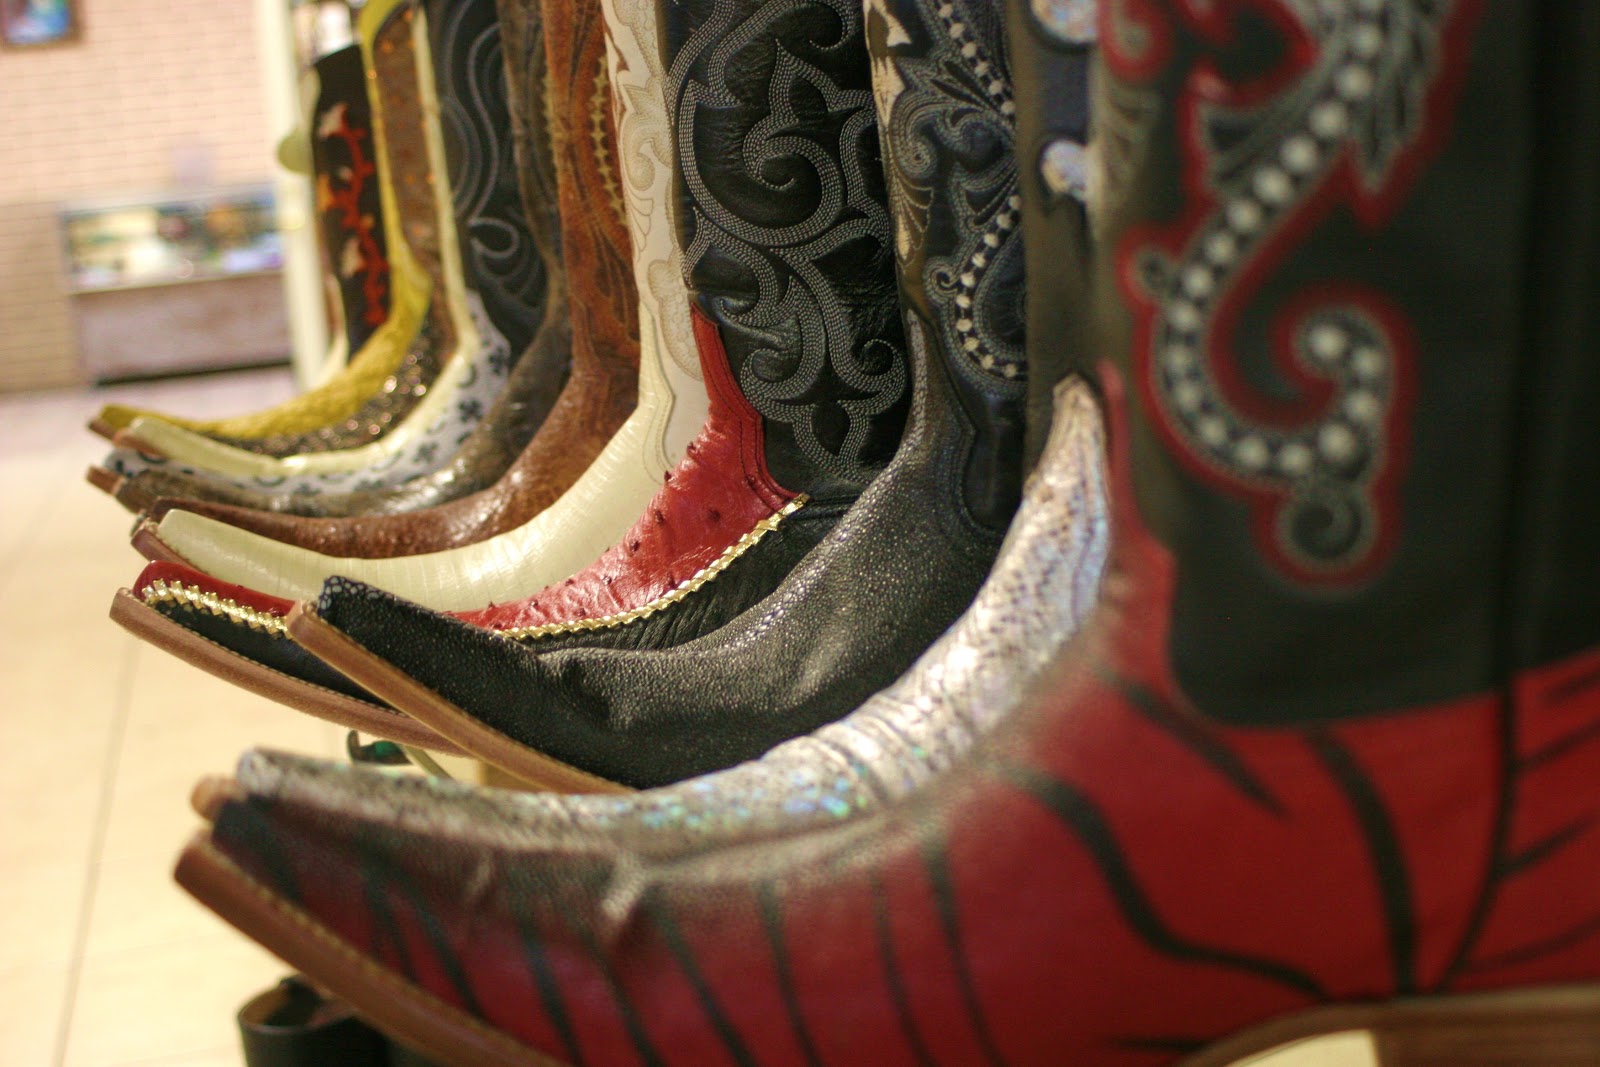 A Hispanic Matter: Boots that range from tribal to eccentric